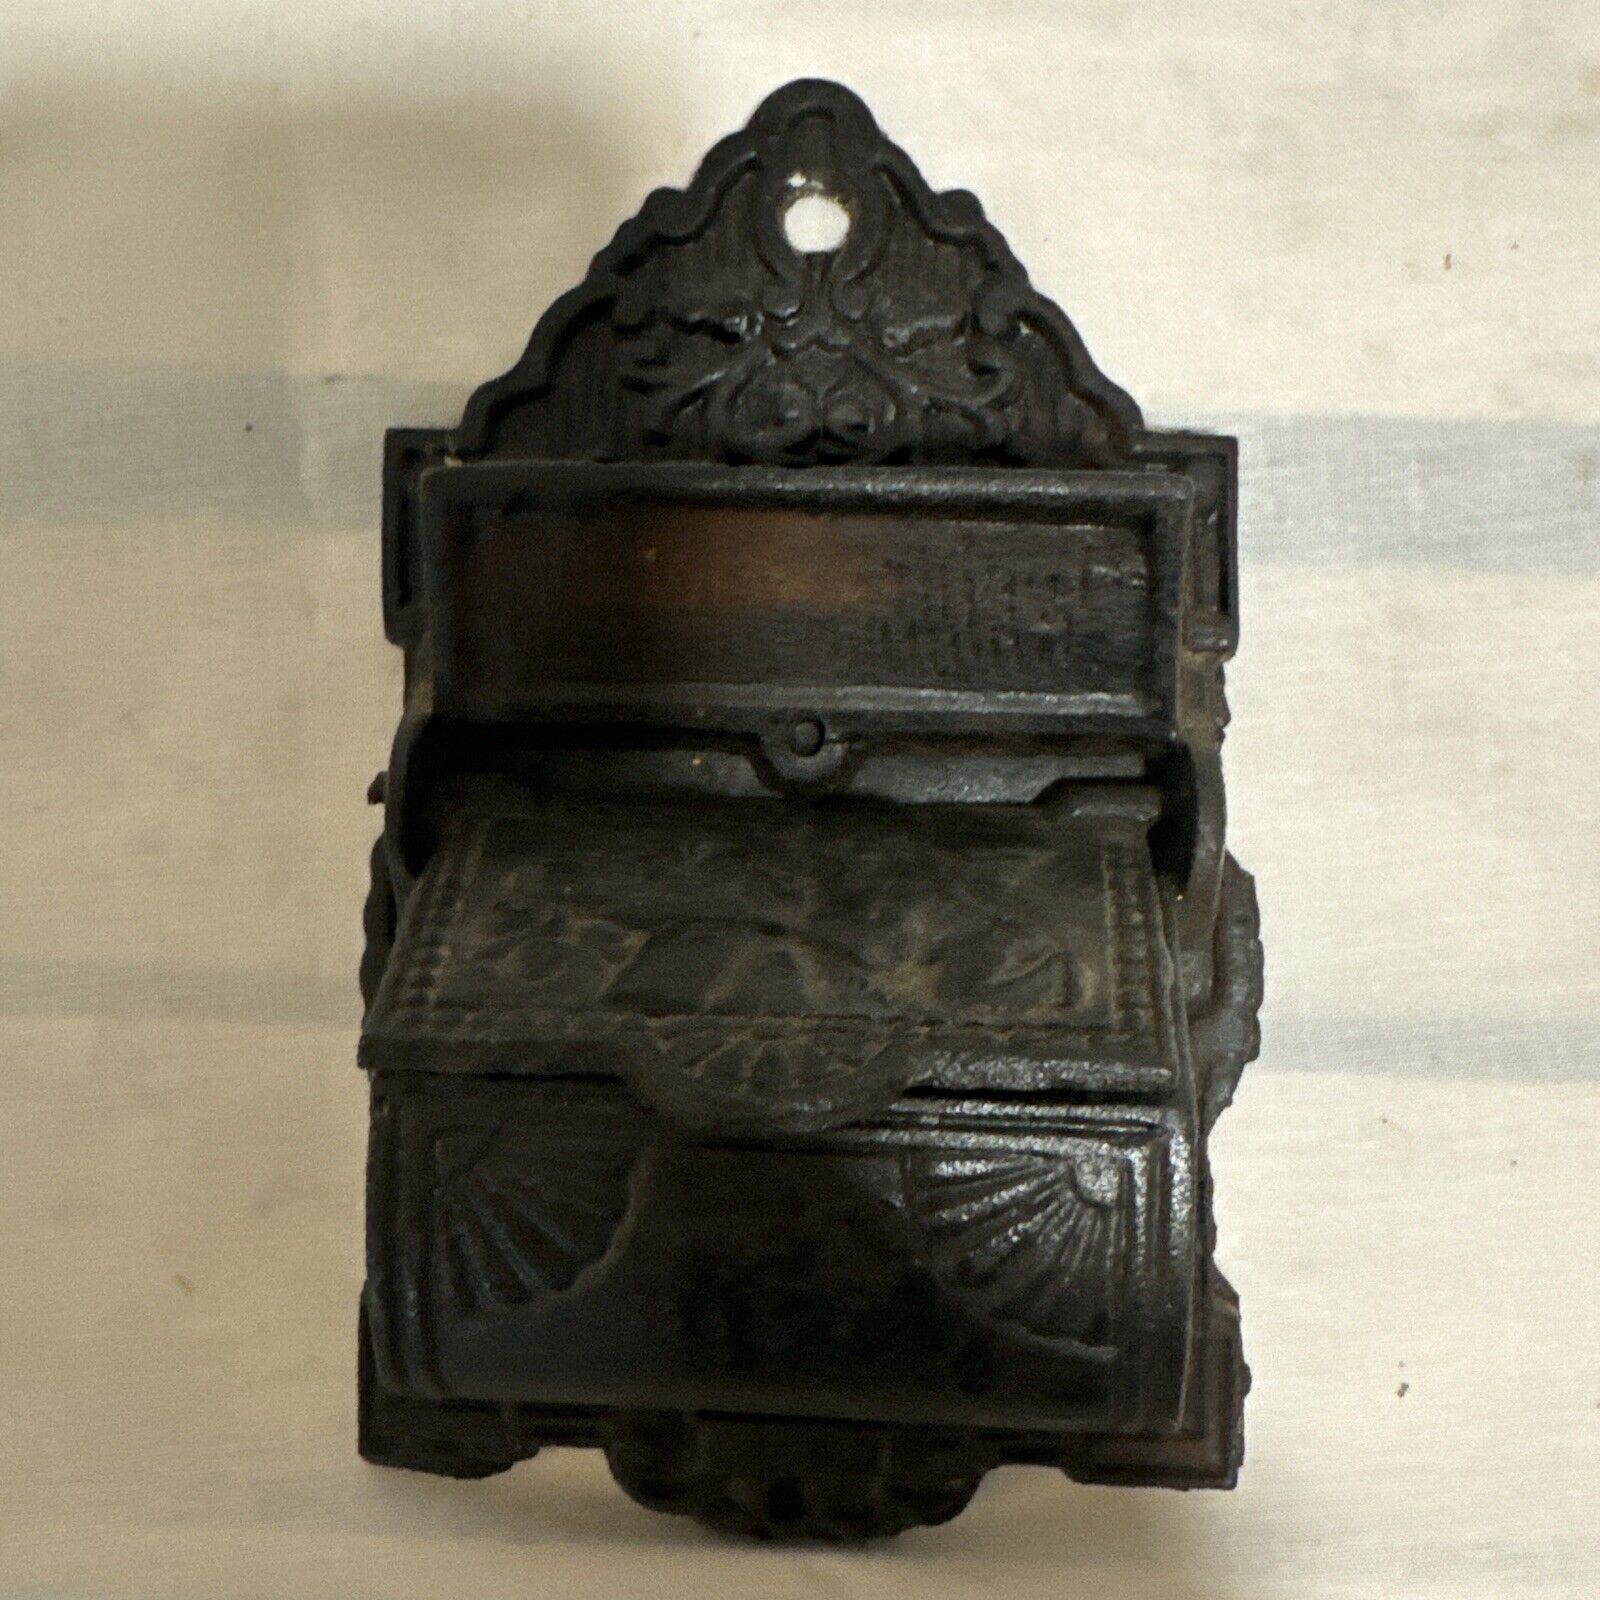 Antique Cast Iron Match Holder 2 Tier Wall Mount Country Kitchen Farmhouse Decor